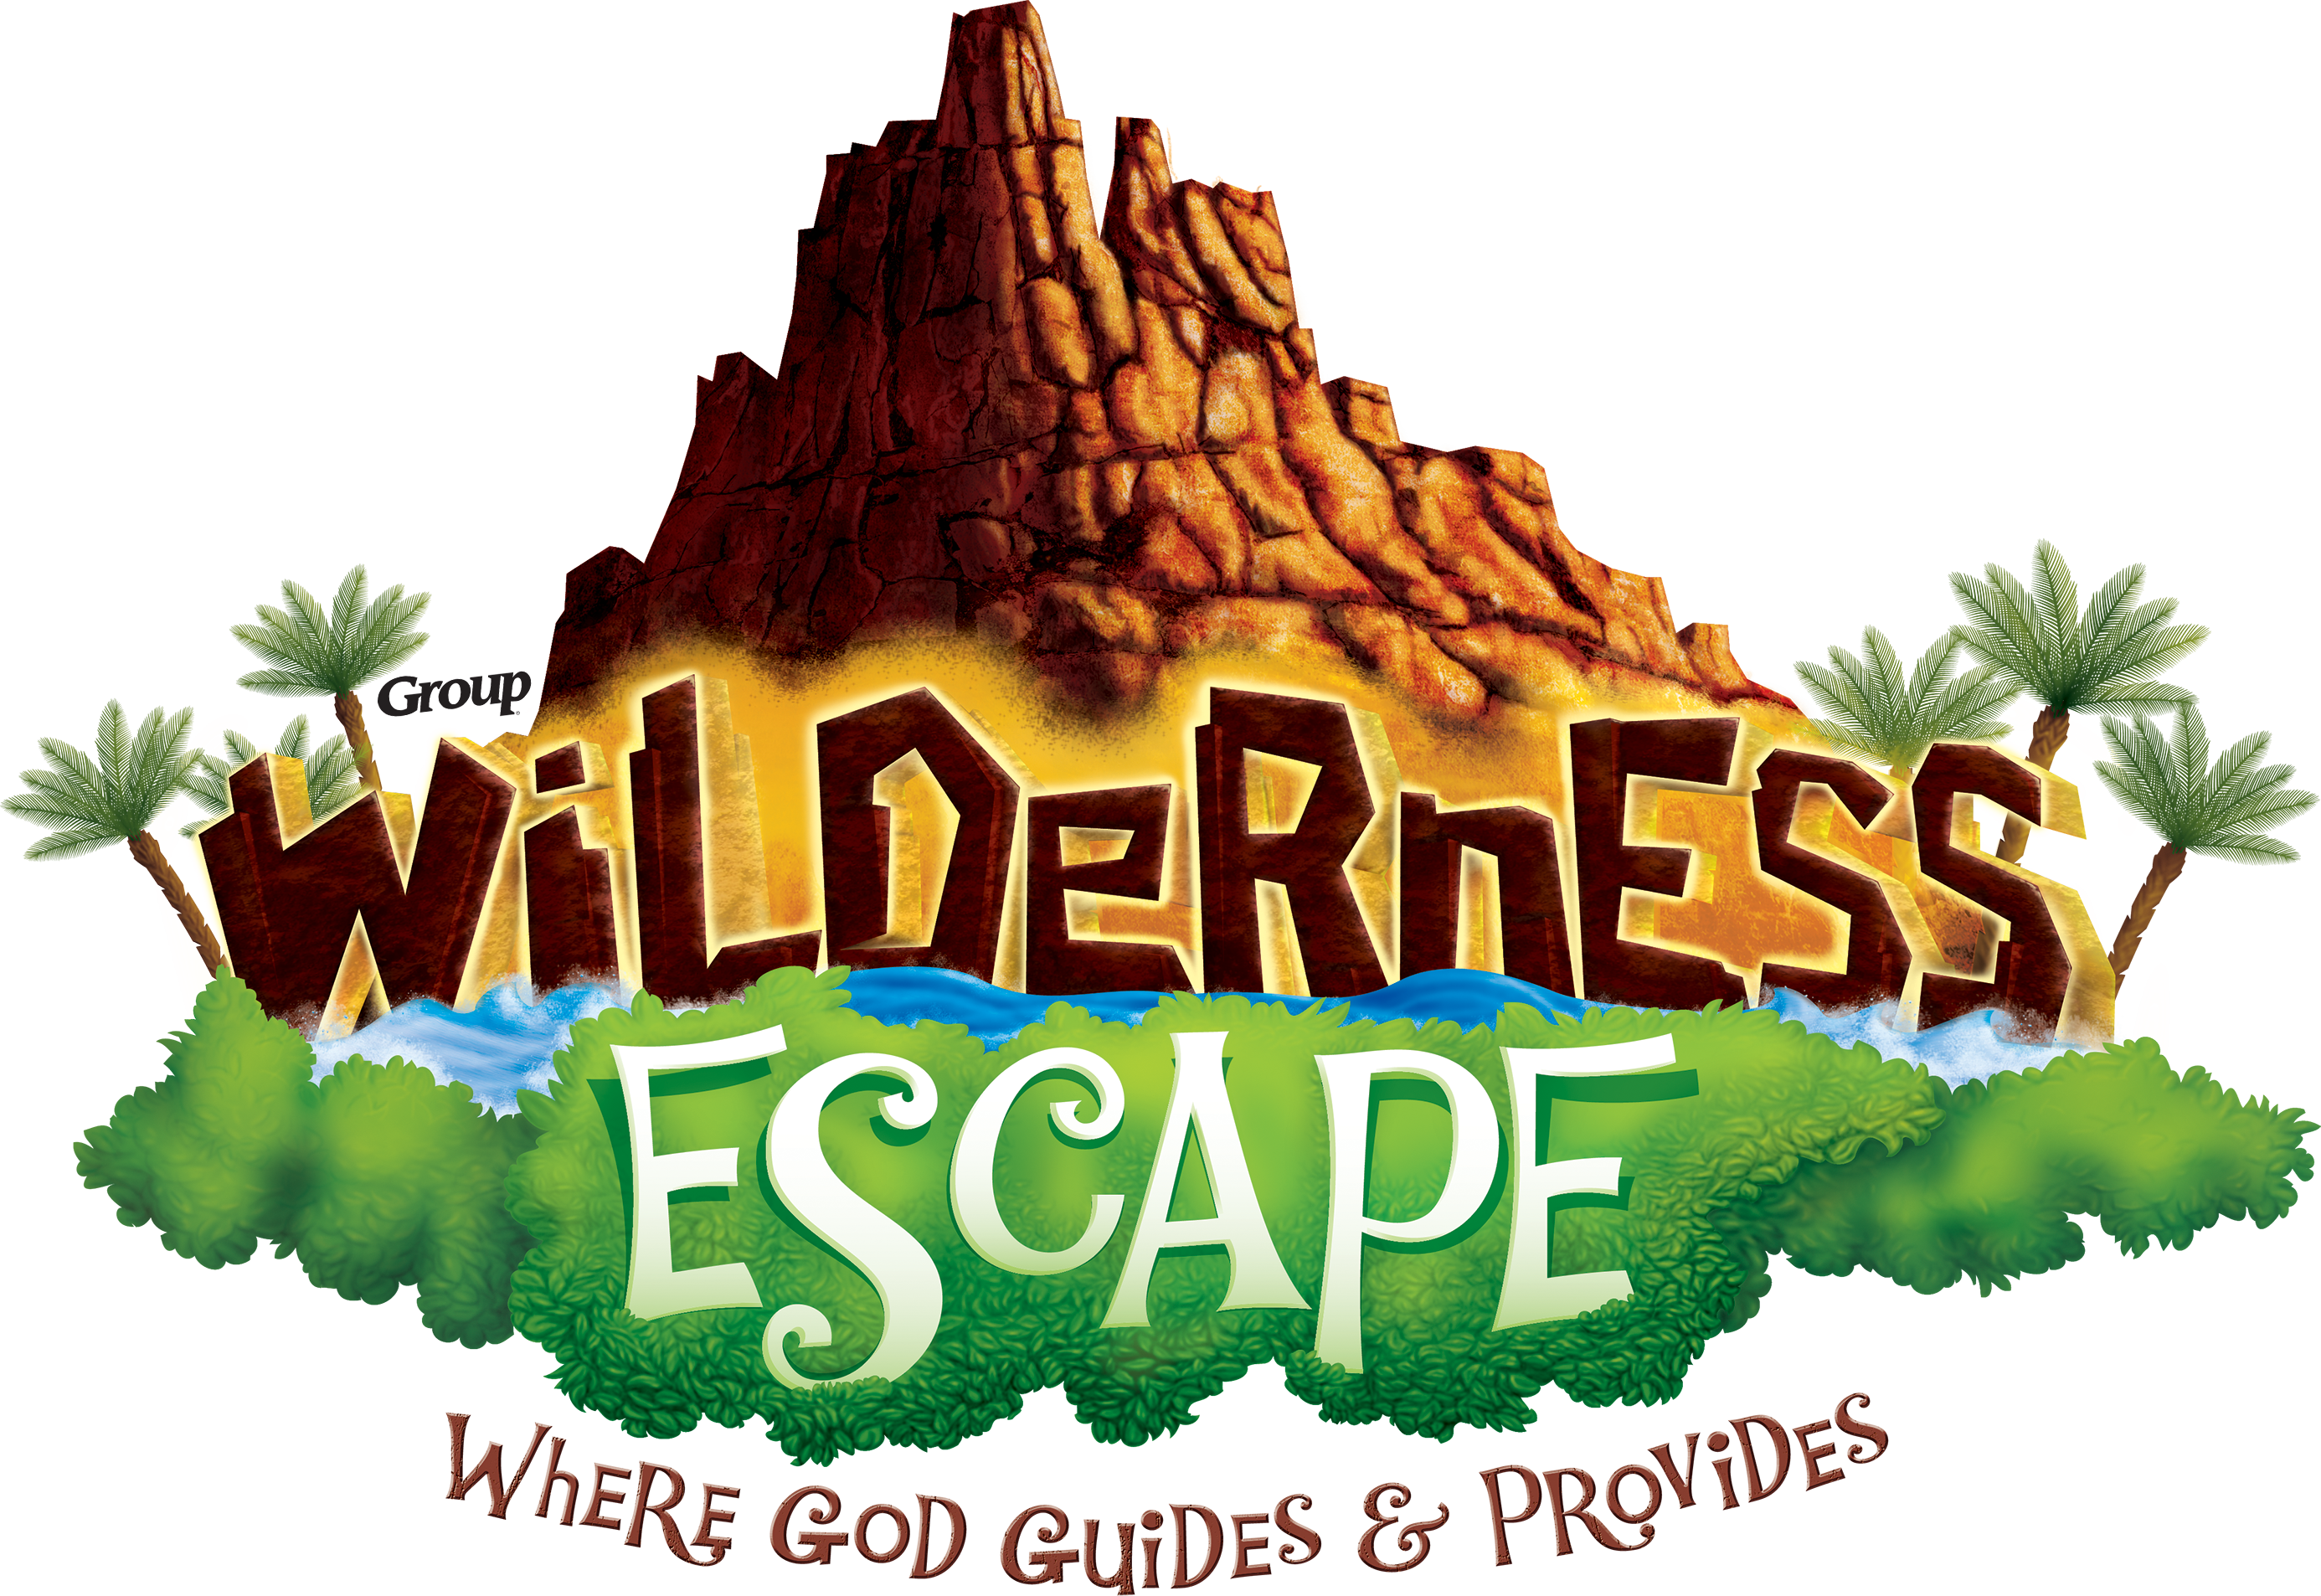 Clip Arts Related To - Vbs 2014 Wilderness Escape.